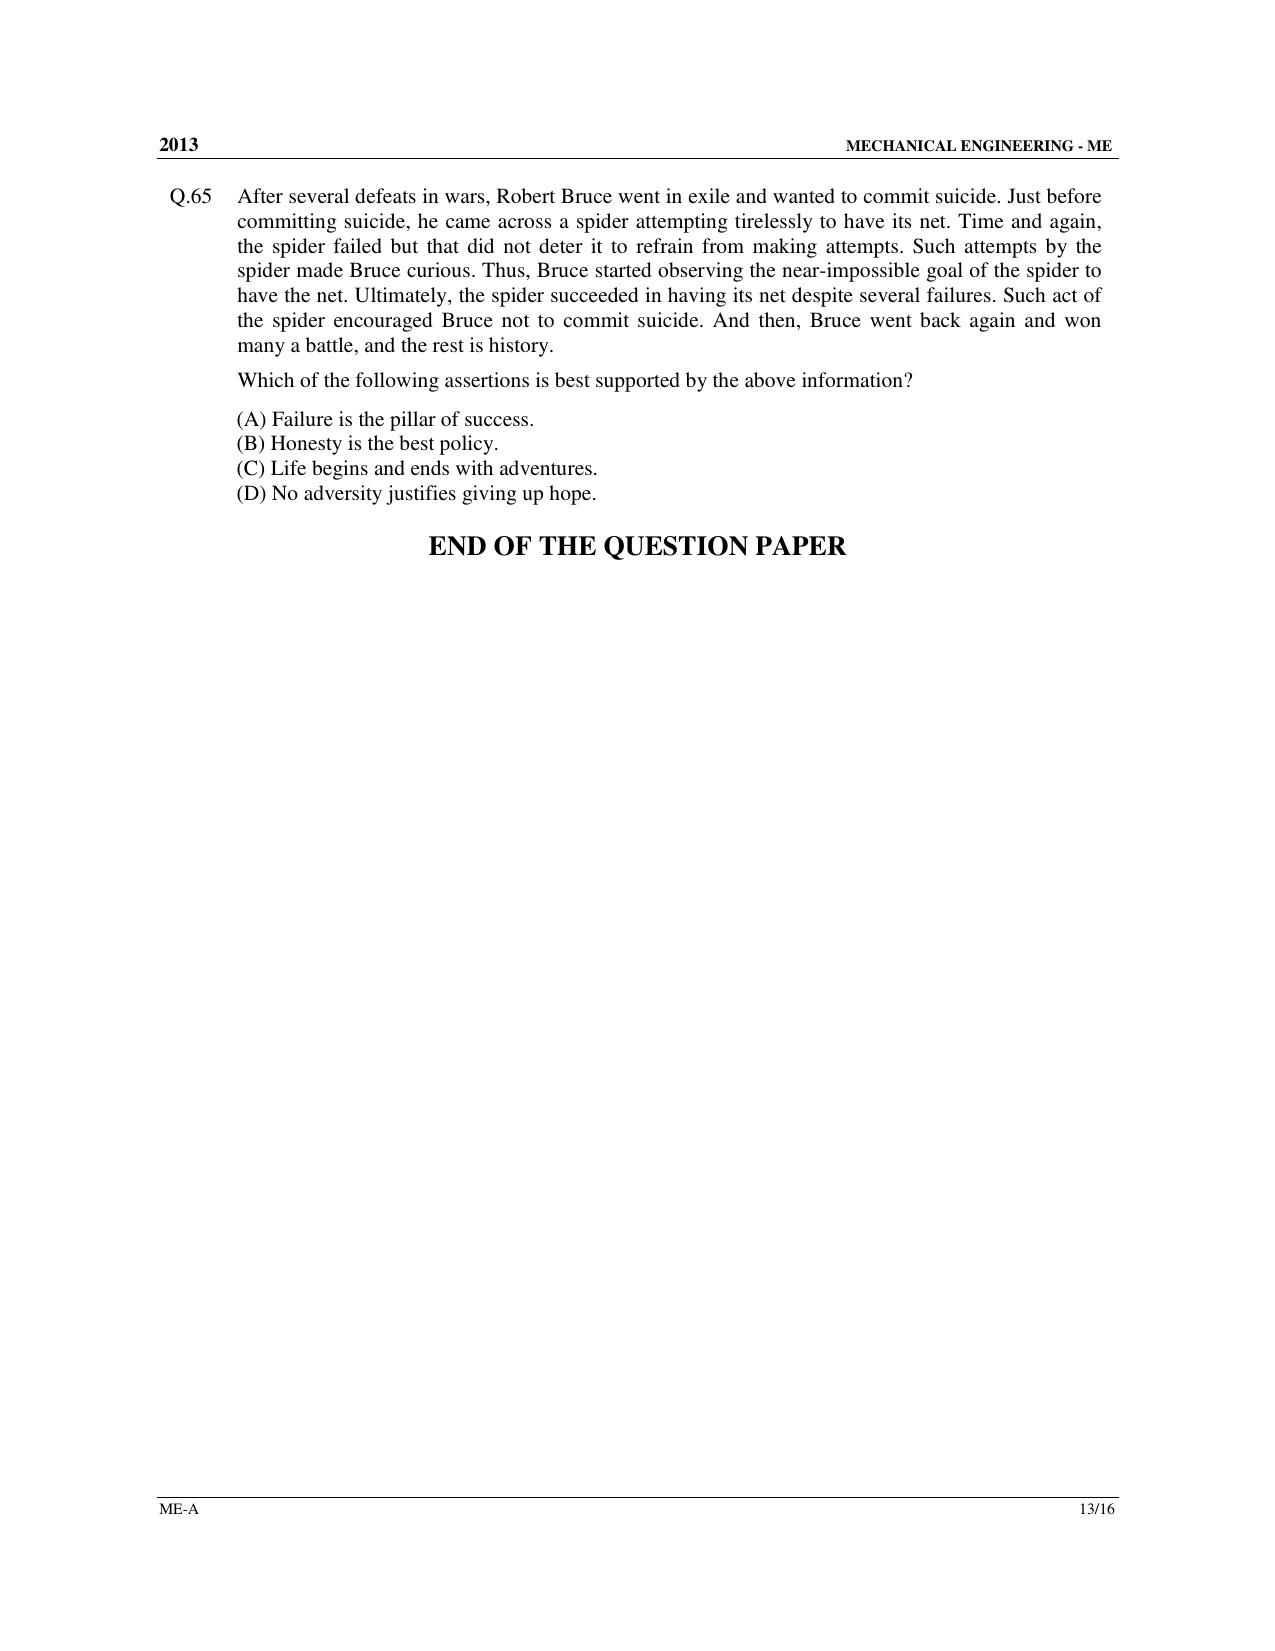 GATE 2013 Mechanical Engineering (ME) Question Paper with Answer Key - Page 14